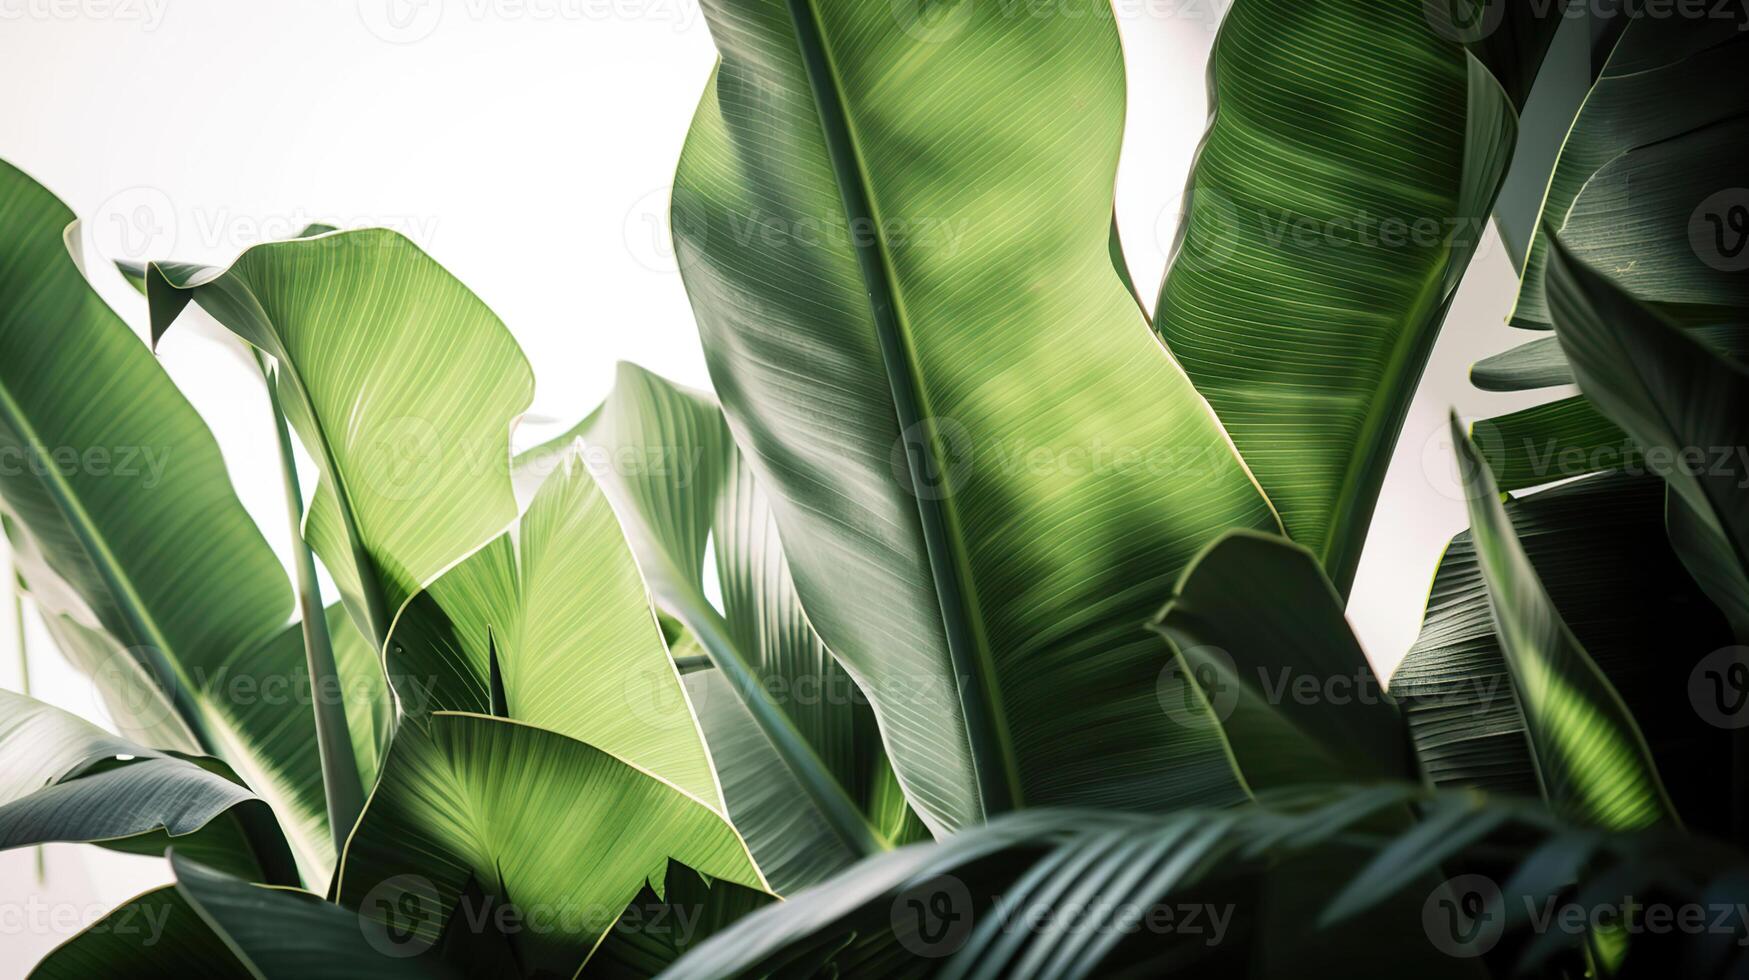 Group of big green banana leaves of exotic palm tree in sunshine on white background. Tropical plant foliage with visible texture. Pollution free symbol, photo